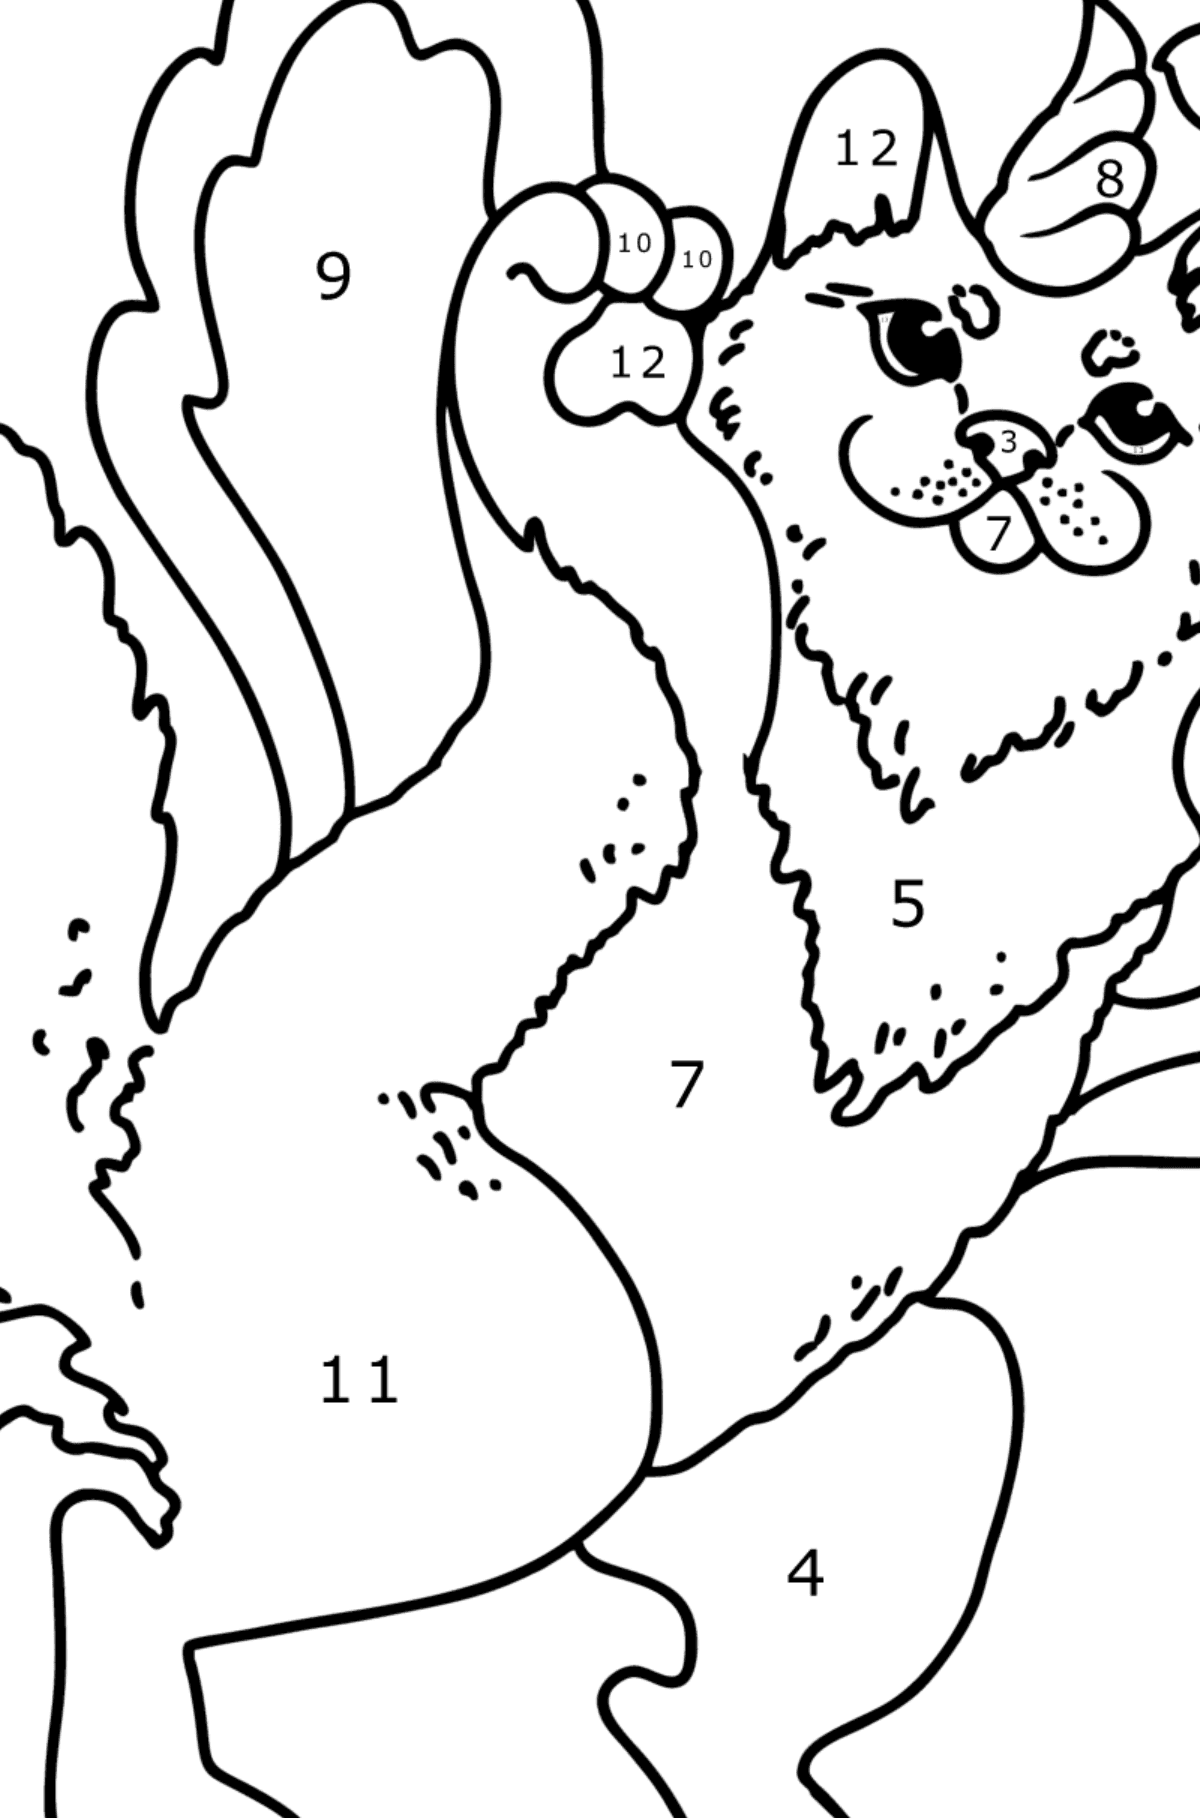 Cat Unicorn coloring page - Coloring by Numbers for Kids